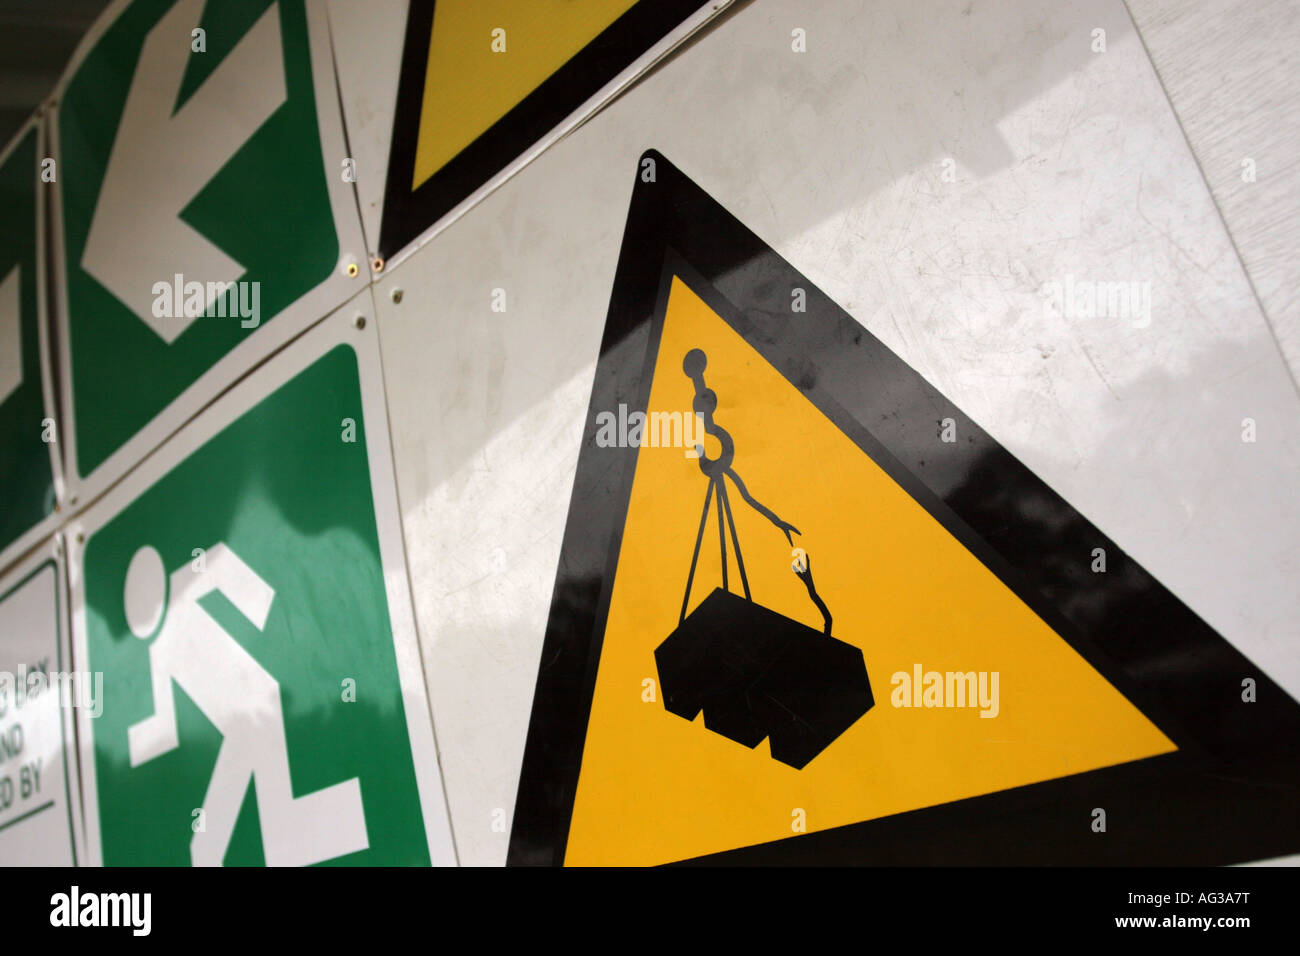 Sign with direction and warning signals on construction site Stock Photo